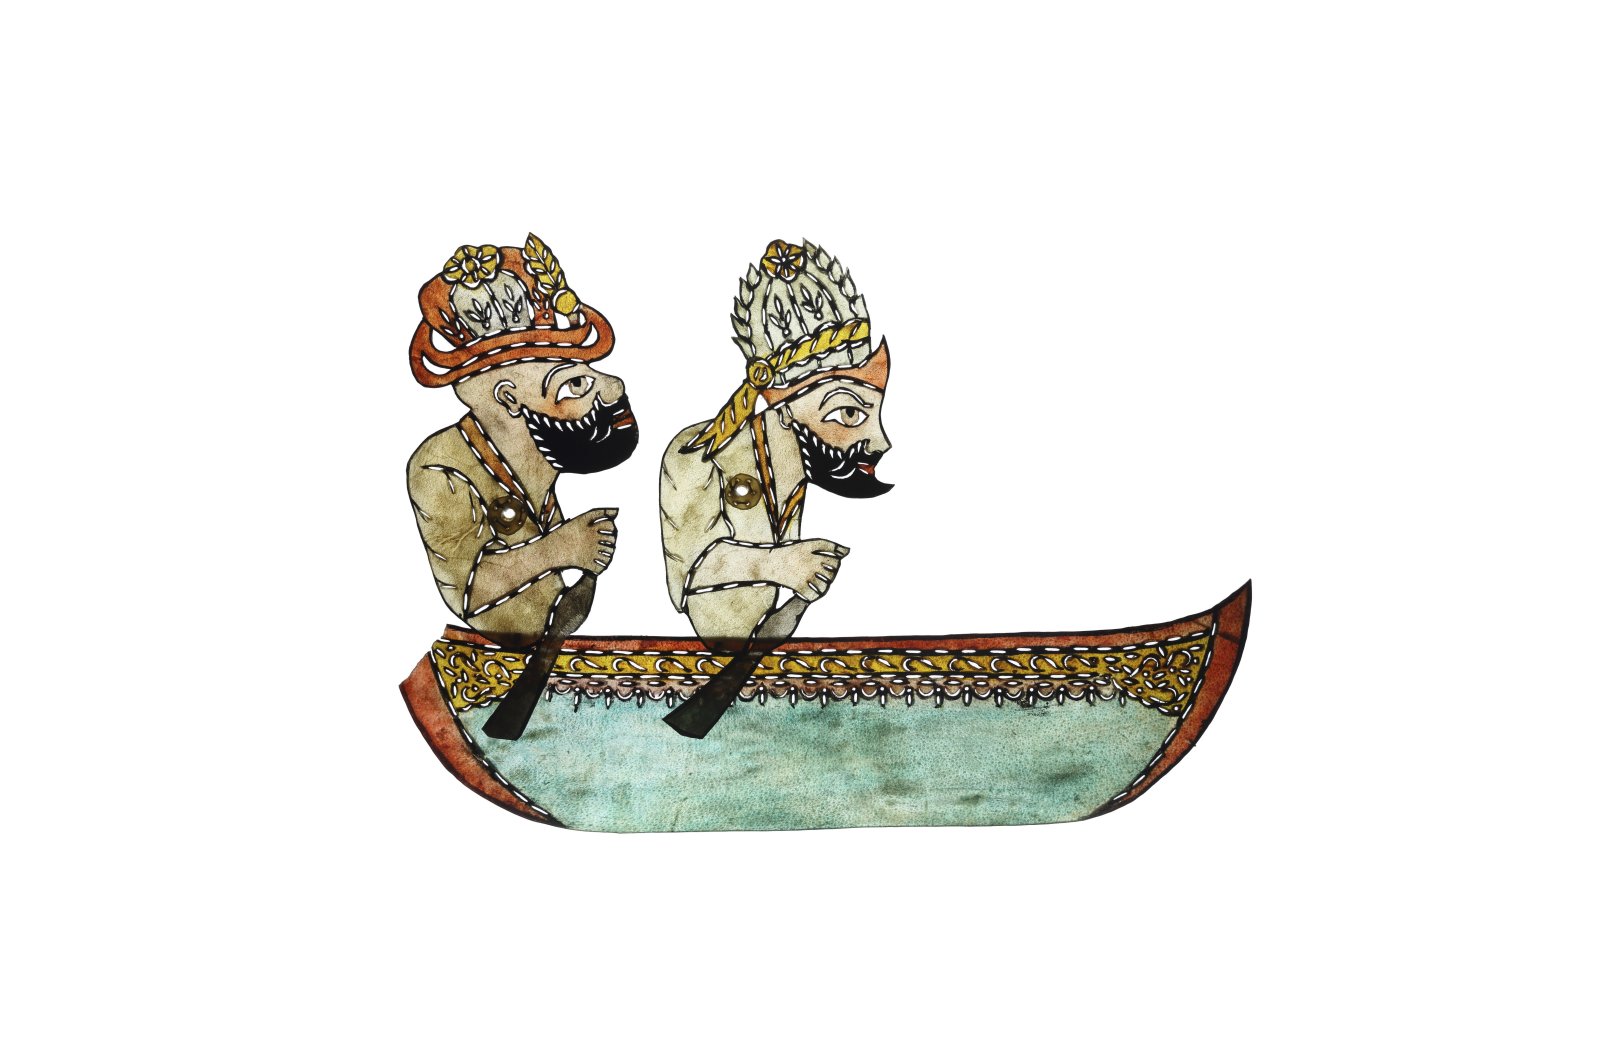 "Karagöz and Hacivat in a Boat," camel leather, 25.7 by 36.5 centimeters (10.1 by 14.3 inches), Yapı Kredi Museum. (Courtesy of YKY Arts and Culture)